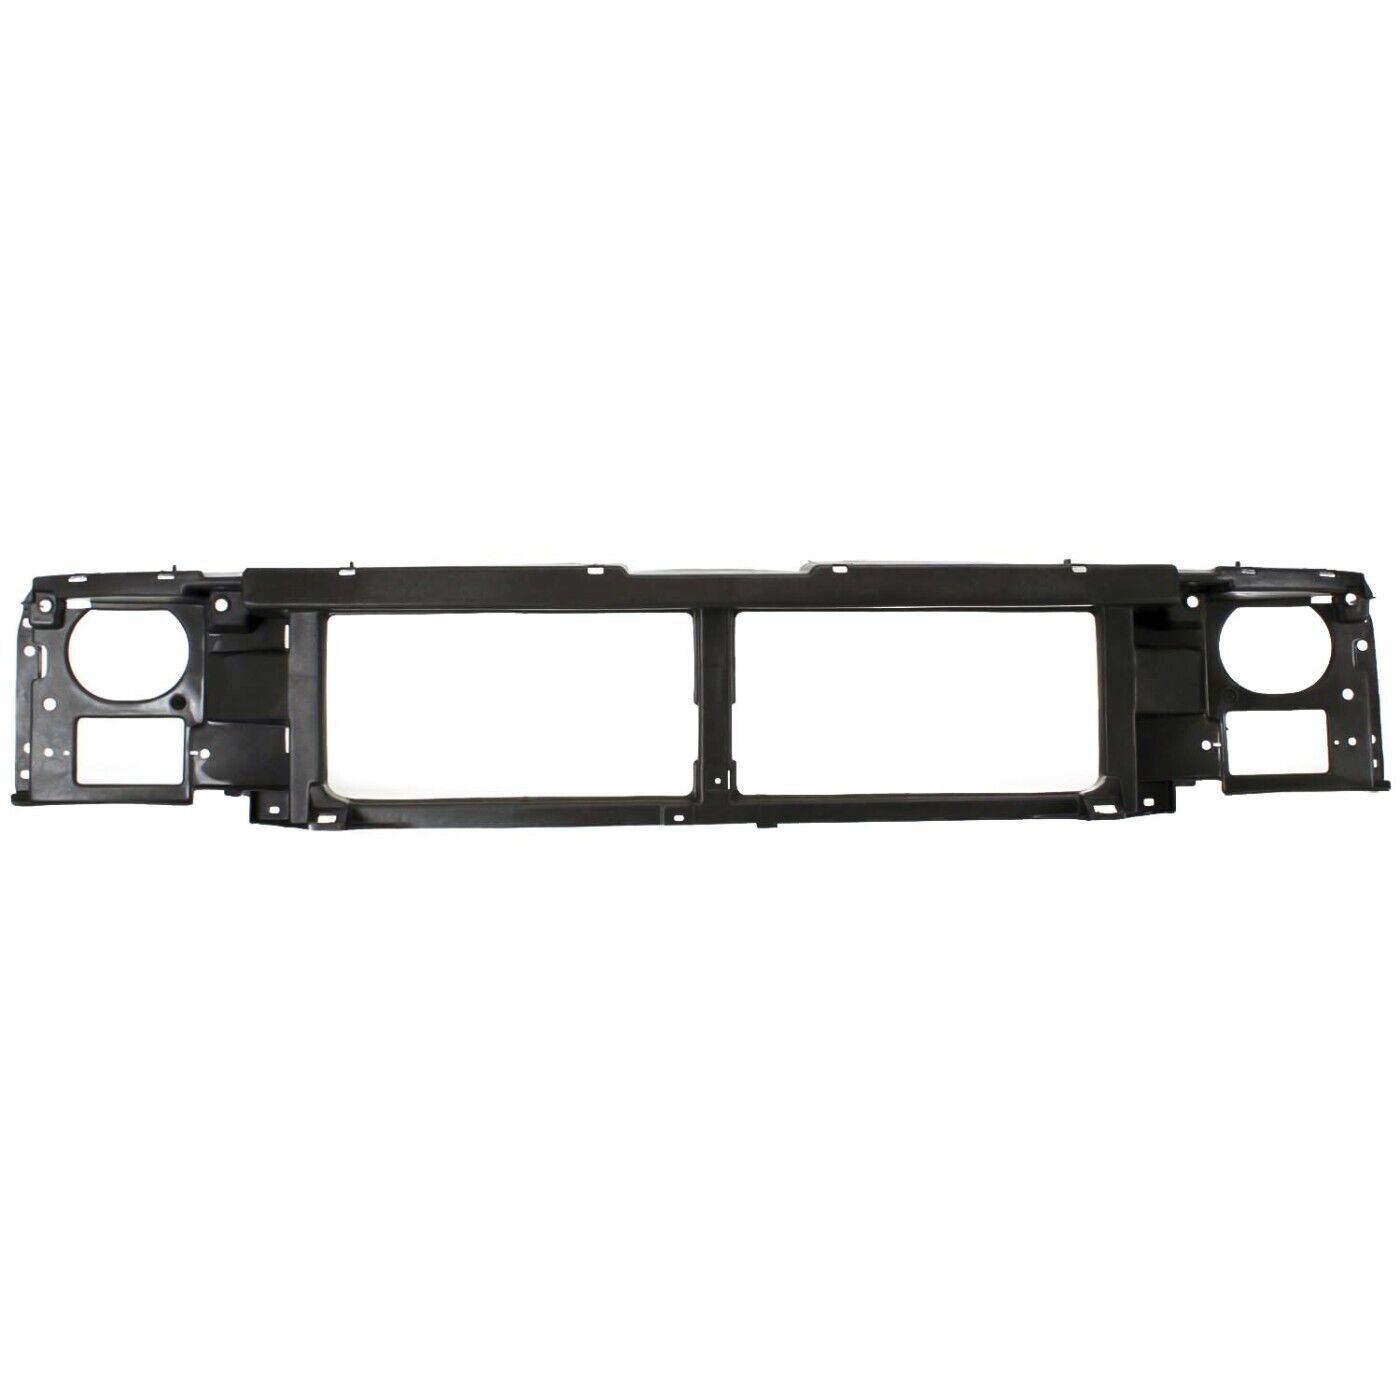 Header Panel For 92-97 Ford F-150 F-250 Grille Mount Panel Thermoplastic